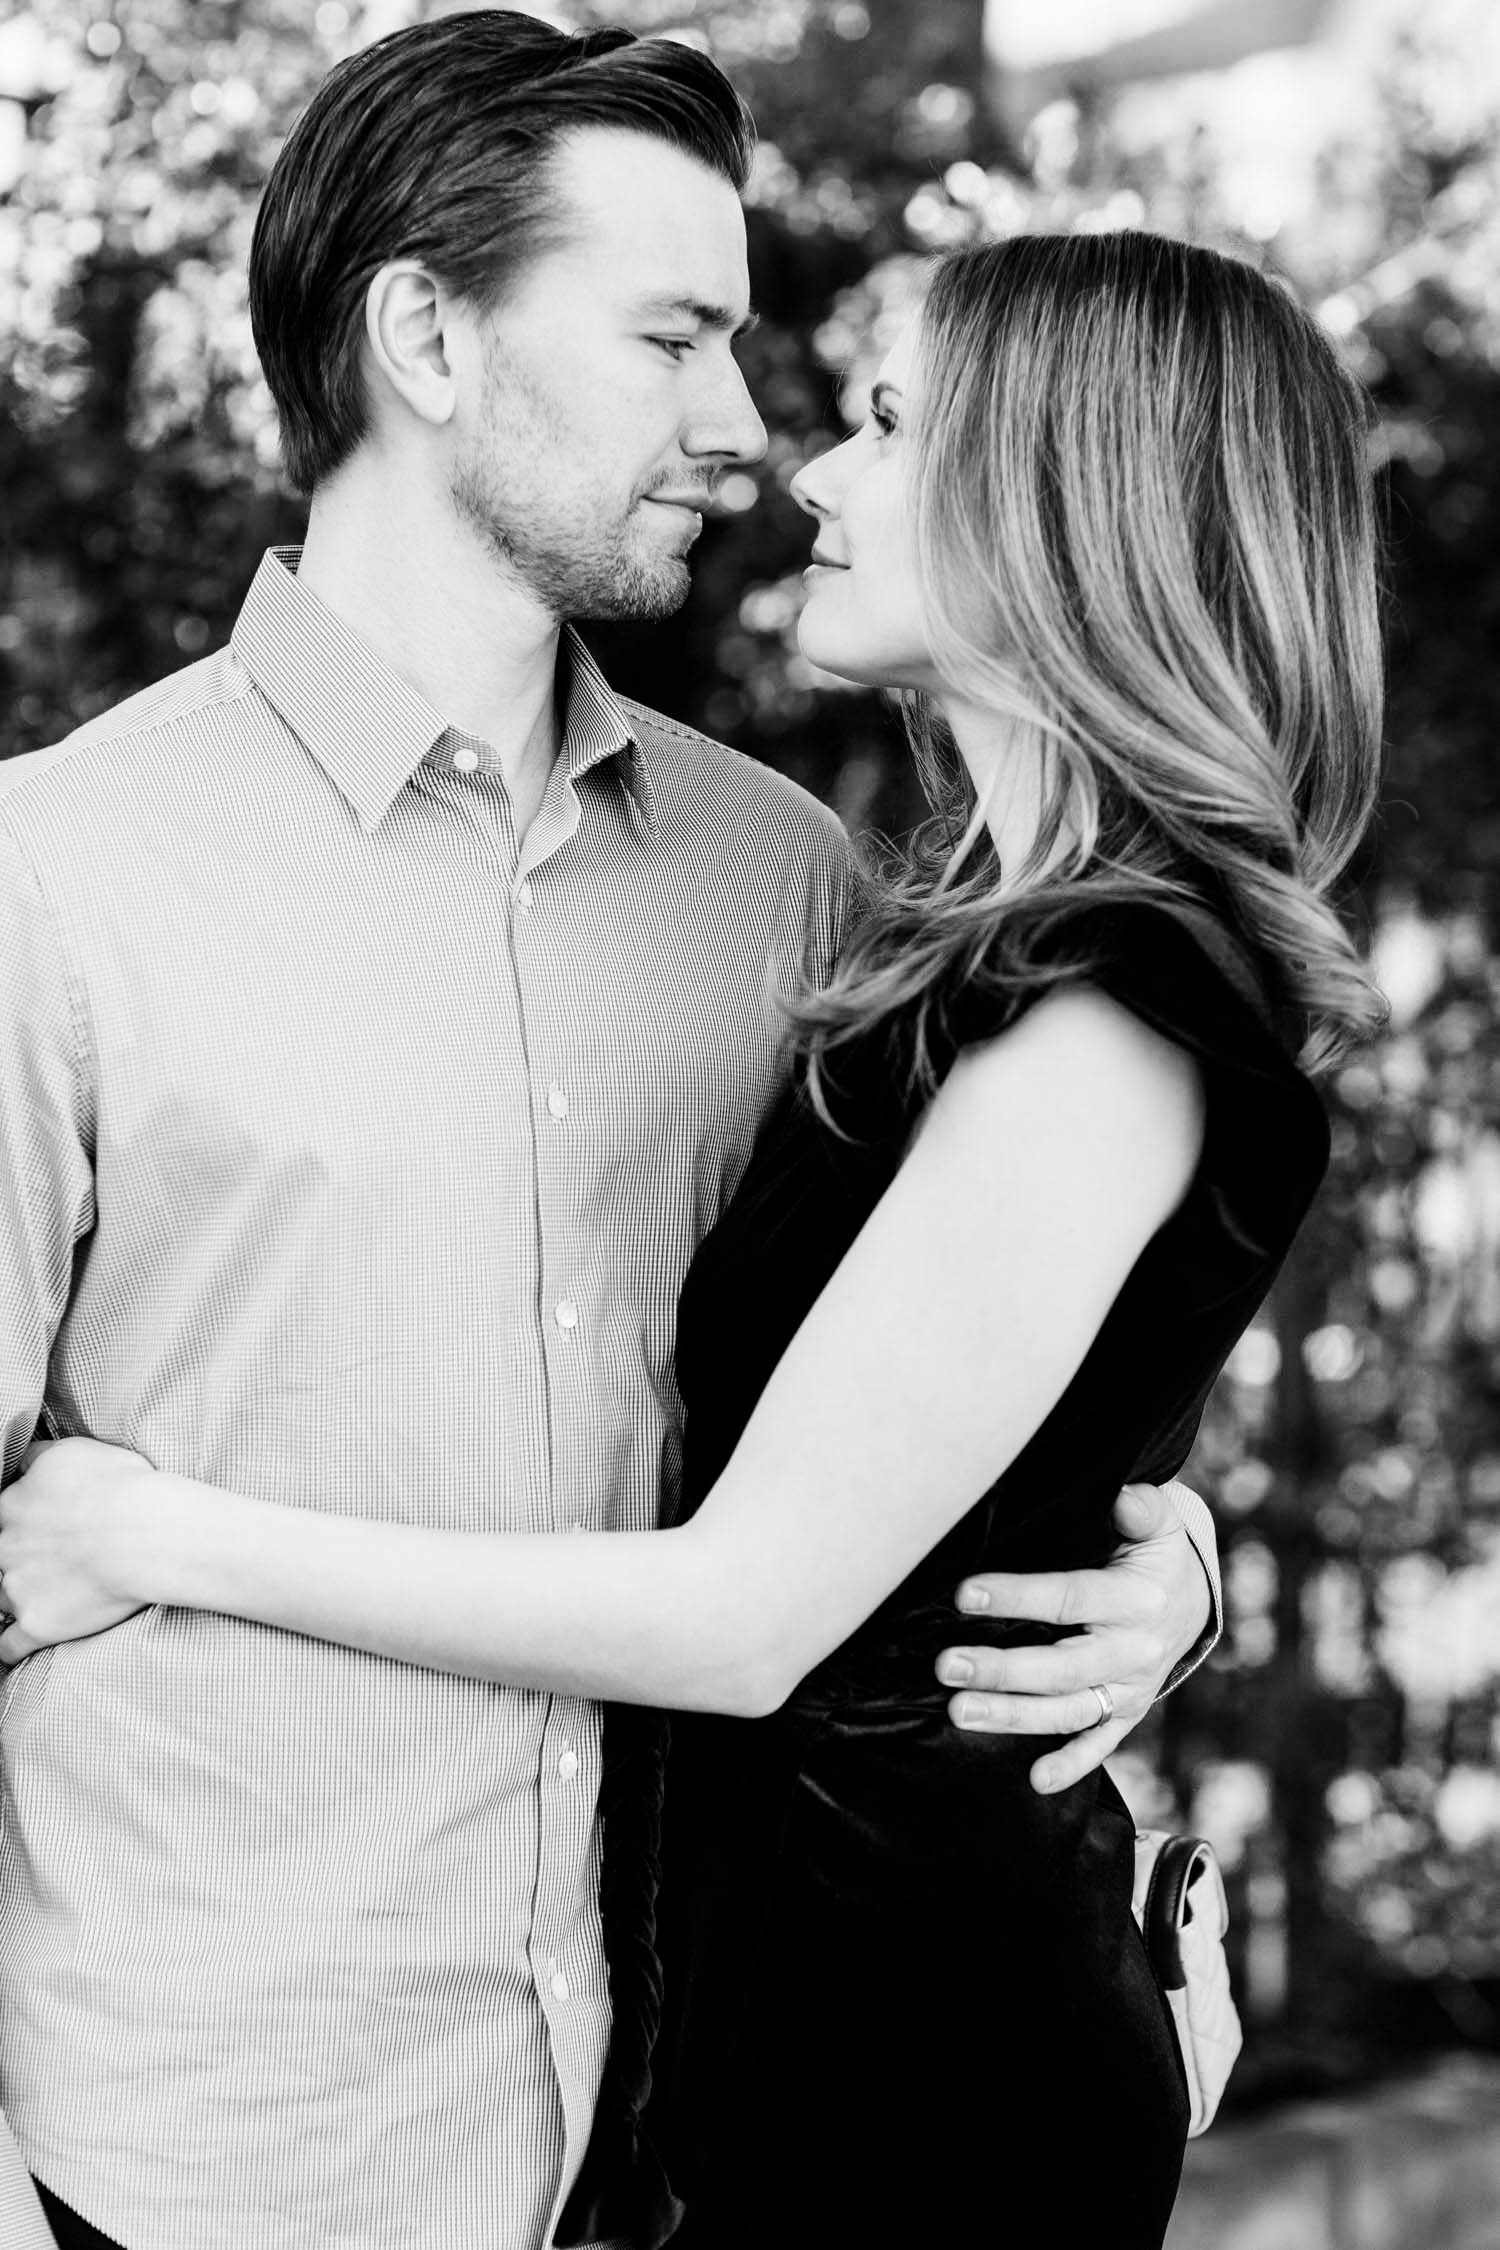 Miss USA 2011 Alyssa Campanella of The A List blog and husband Torrance Coombs of Reign celebrate Valentine's Day